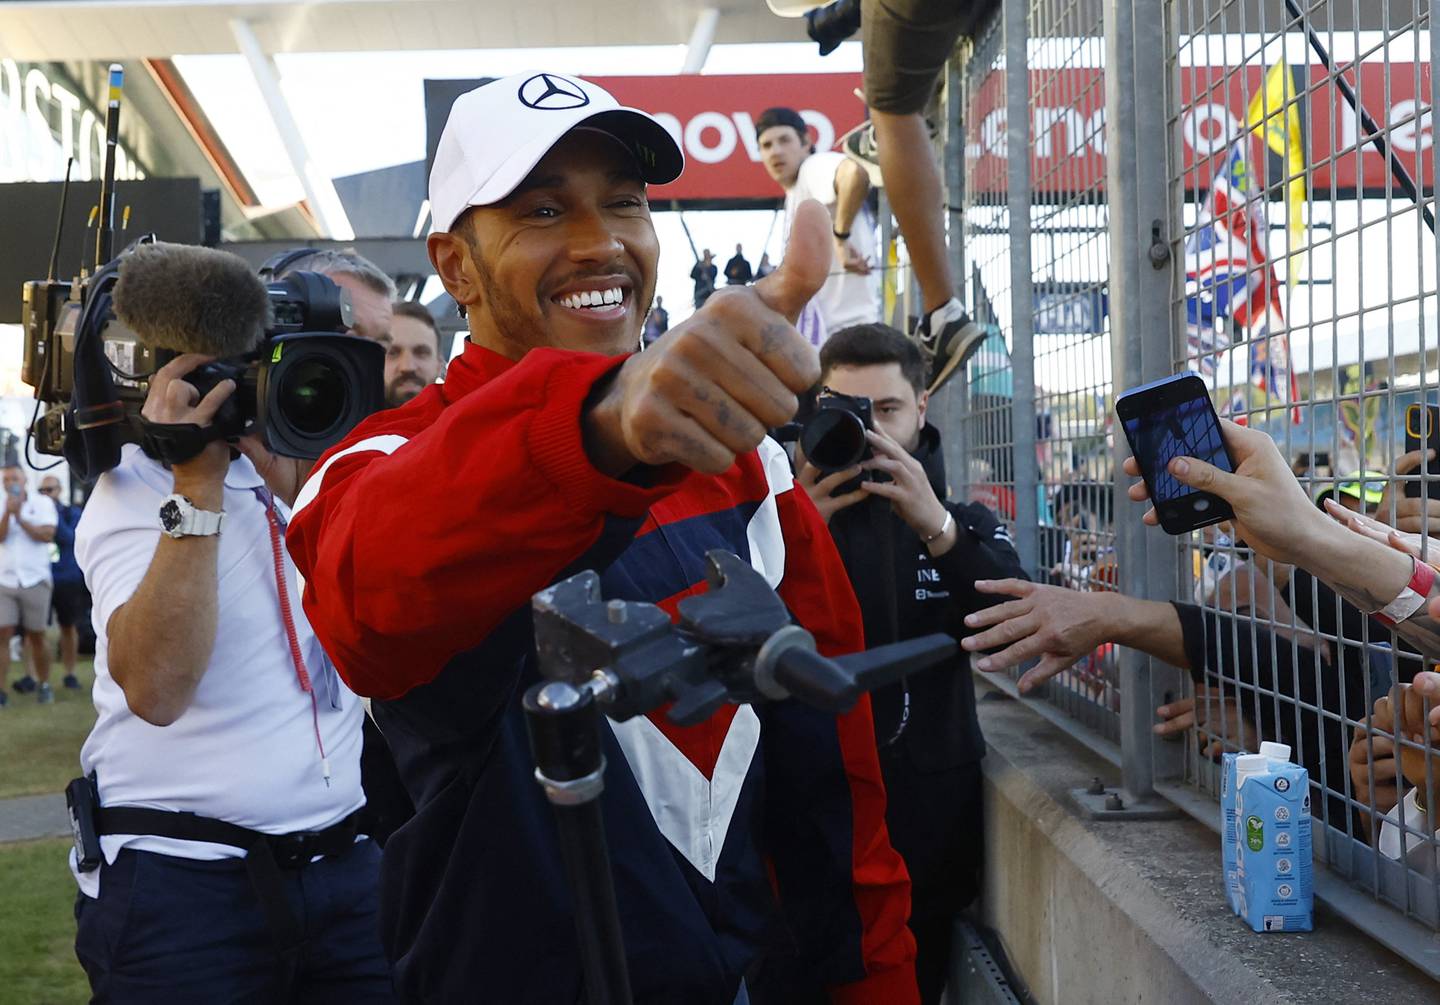 Lewis Hamilton, who took third at the British Grand Prix, has a patchy record in Austria. Reuters